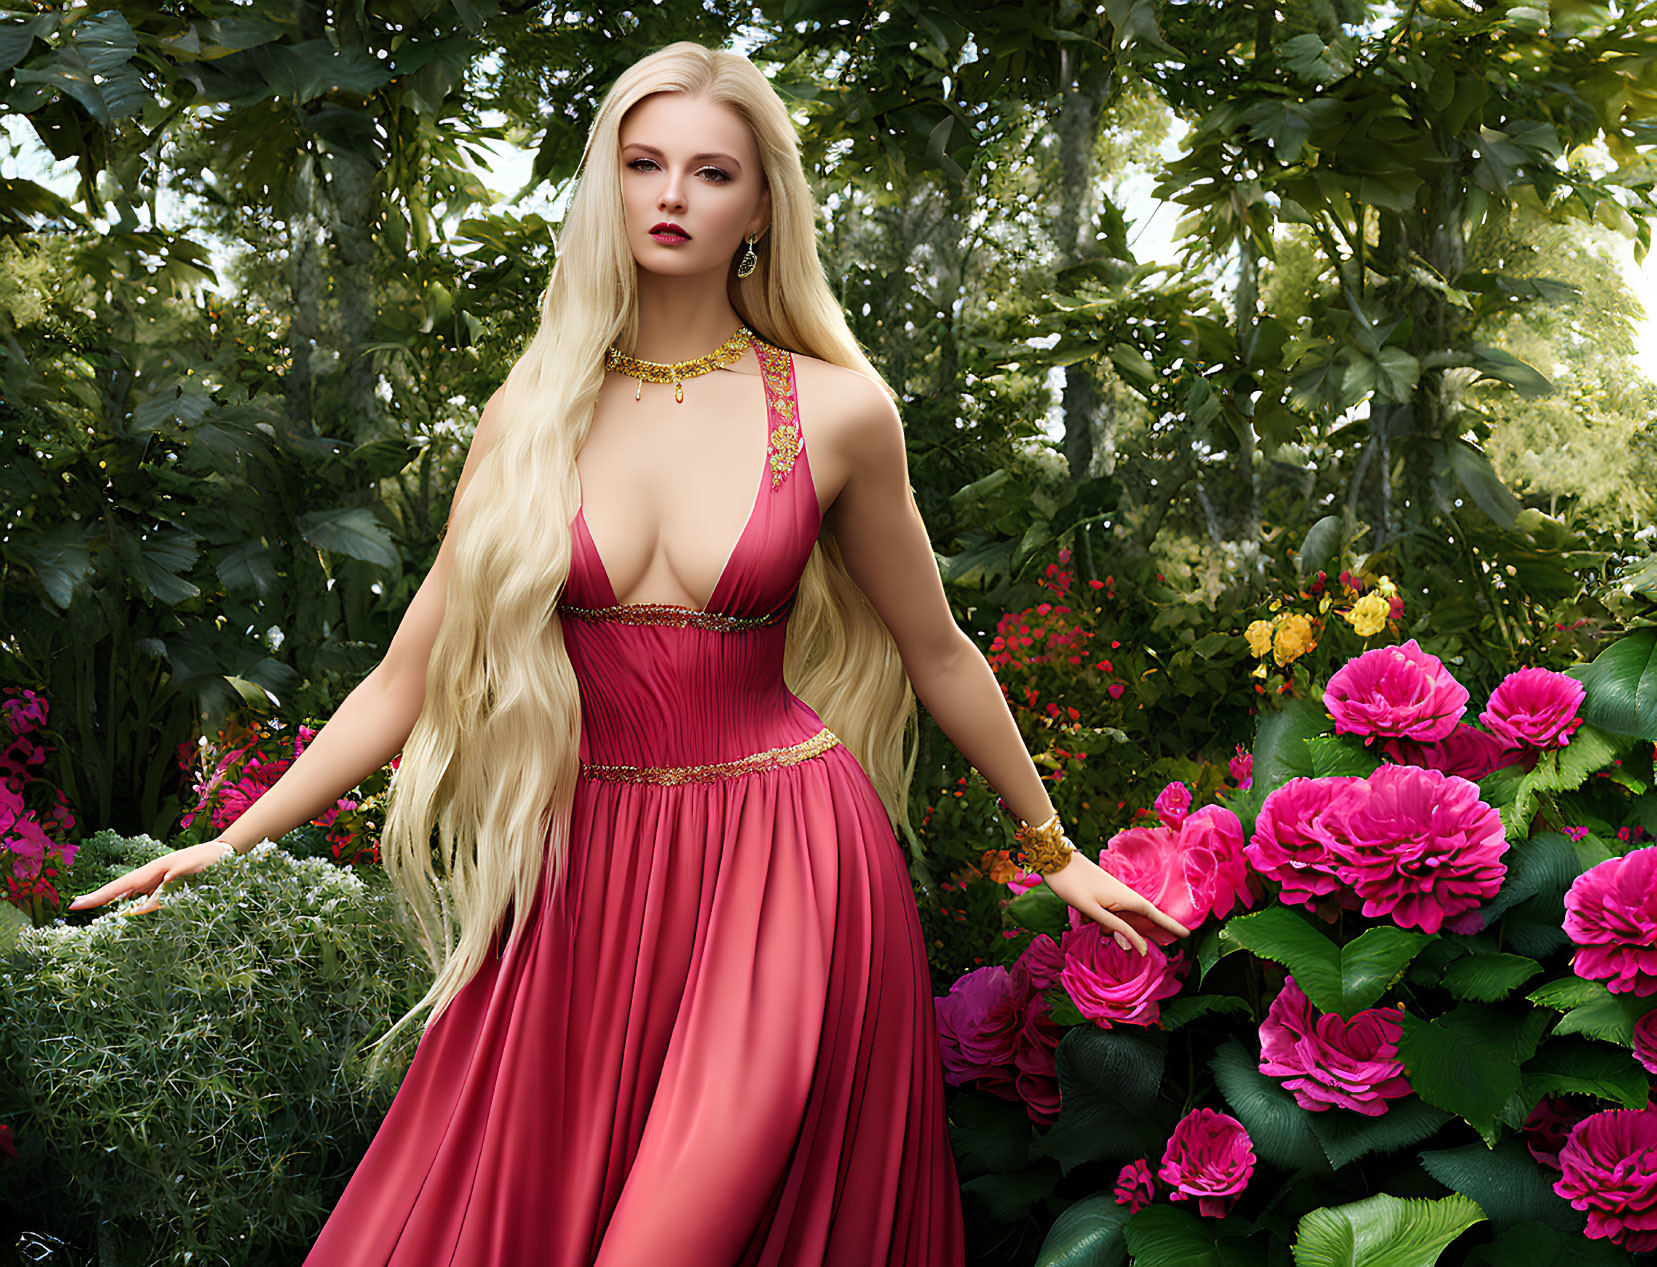 Woman in red dress in vibrant garden with pink flowers